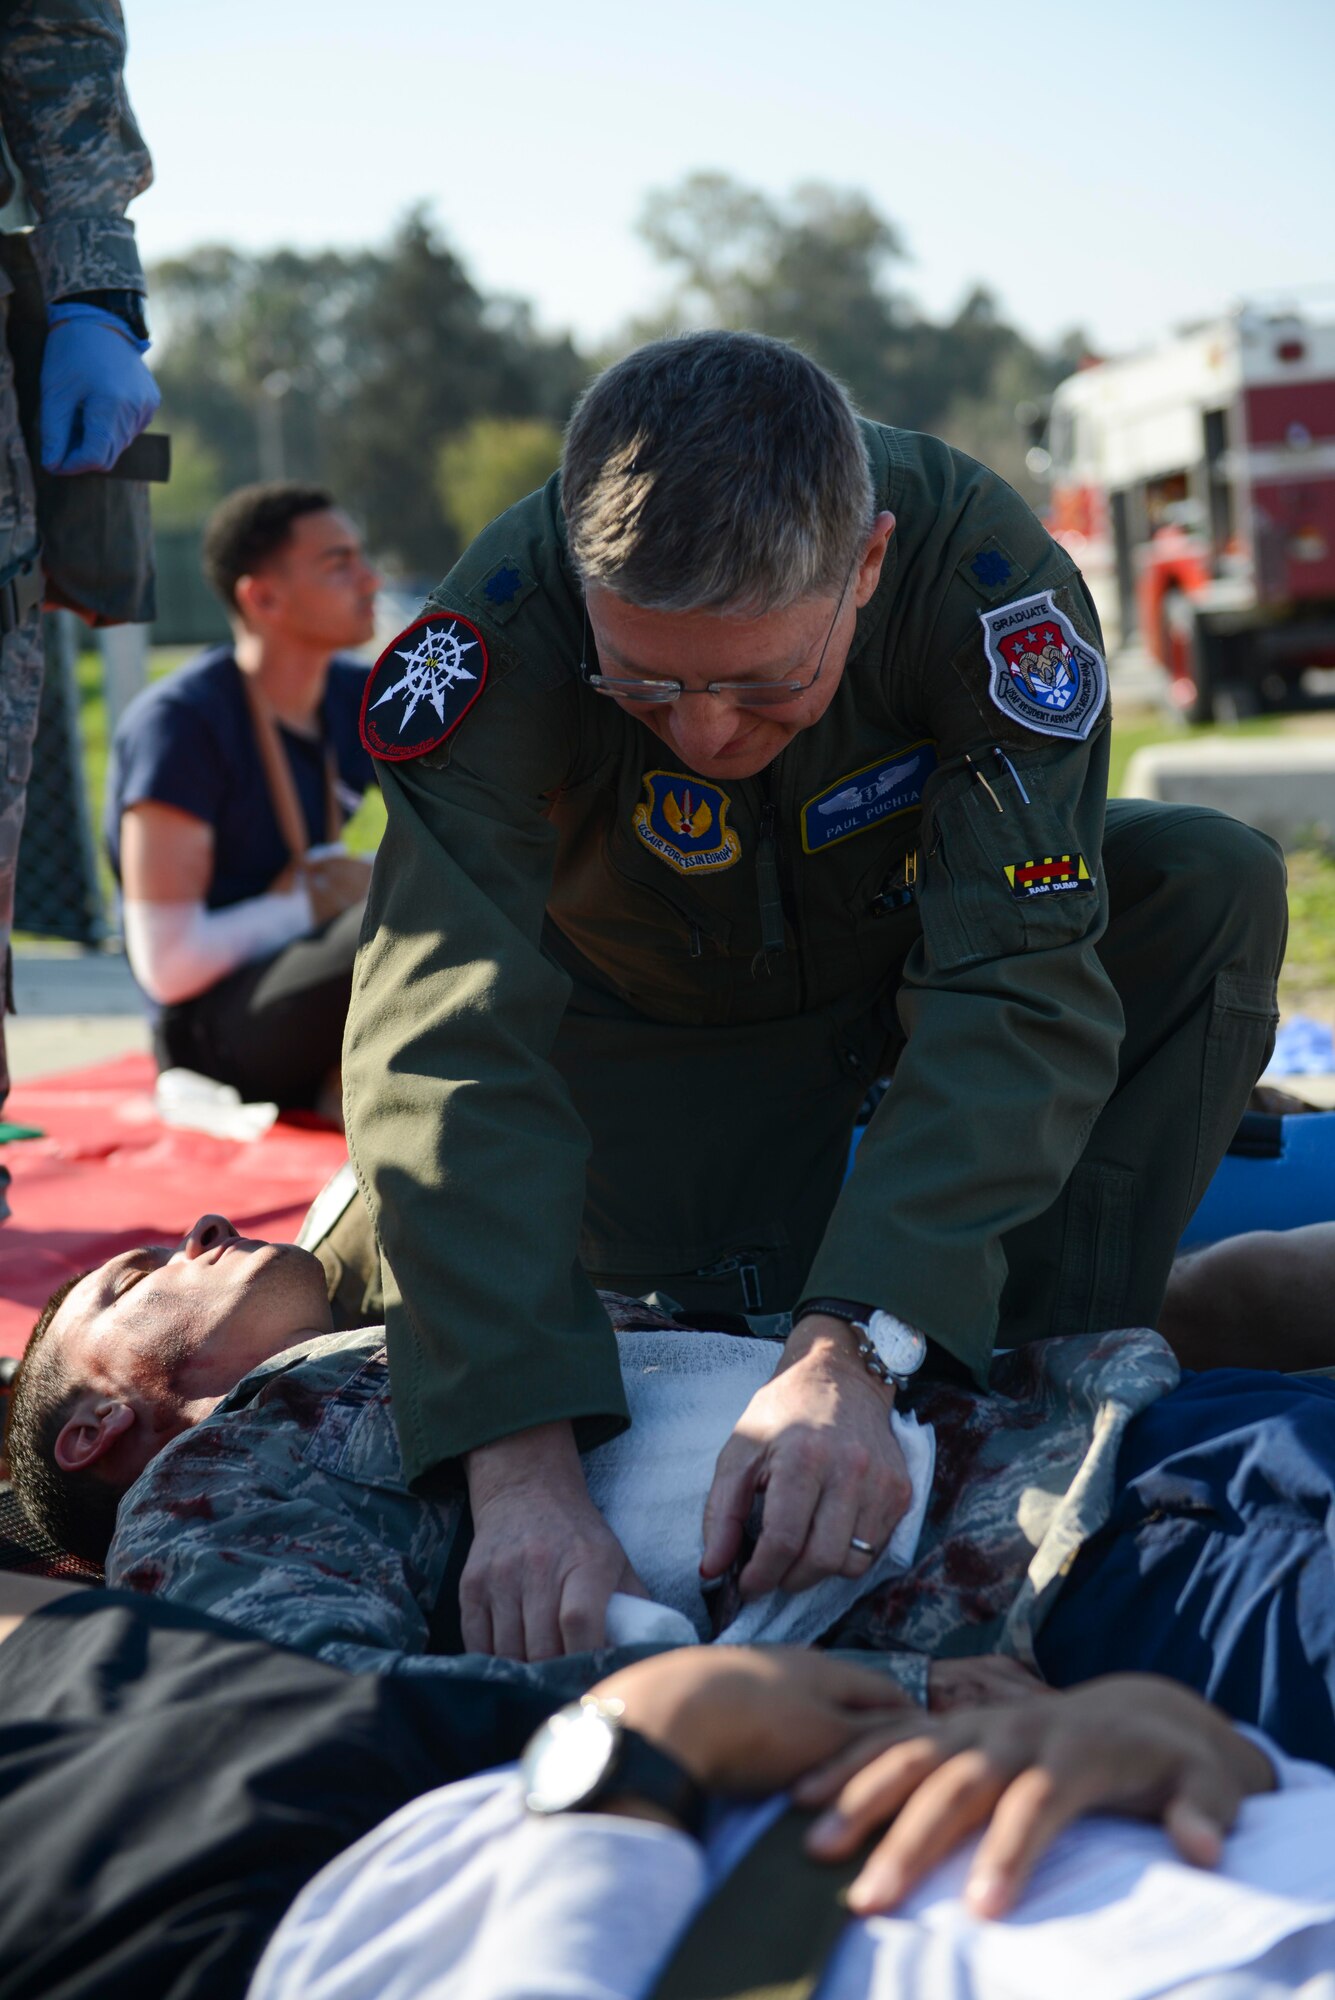 U.S. Air Force Lt. Col. Paul Puchta, 39th Medical Group chief of aerospace medicine, aids a simulated aircraft accident victim during a major accident response exercise (MARE) March 29, 2017, at Incirlik Air Base, Turkey. During a MARE, all simulated medical injuries and victims are treated as if they are real by firefighters and medical personnel.  (U.S. Air Force photo by Airman 1st Class Devin M. Rumbaugh)